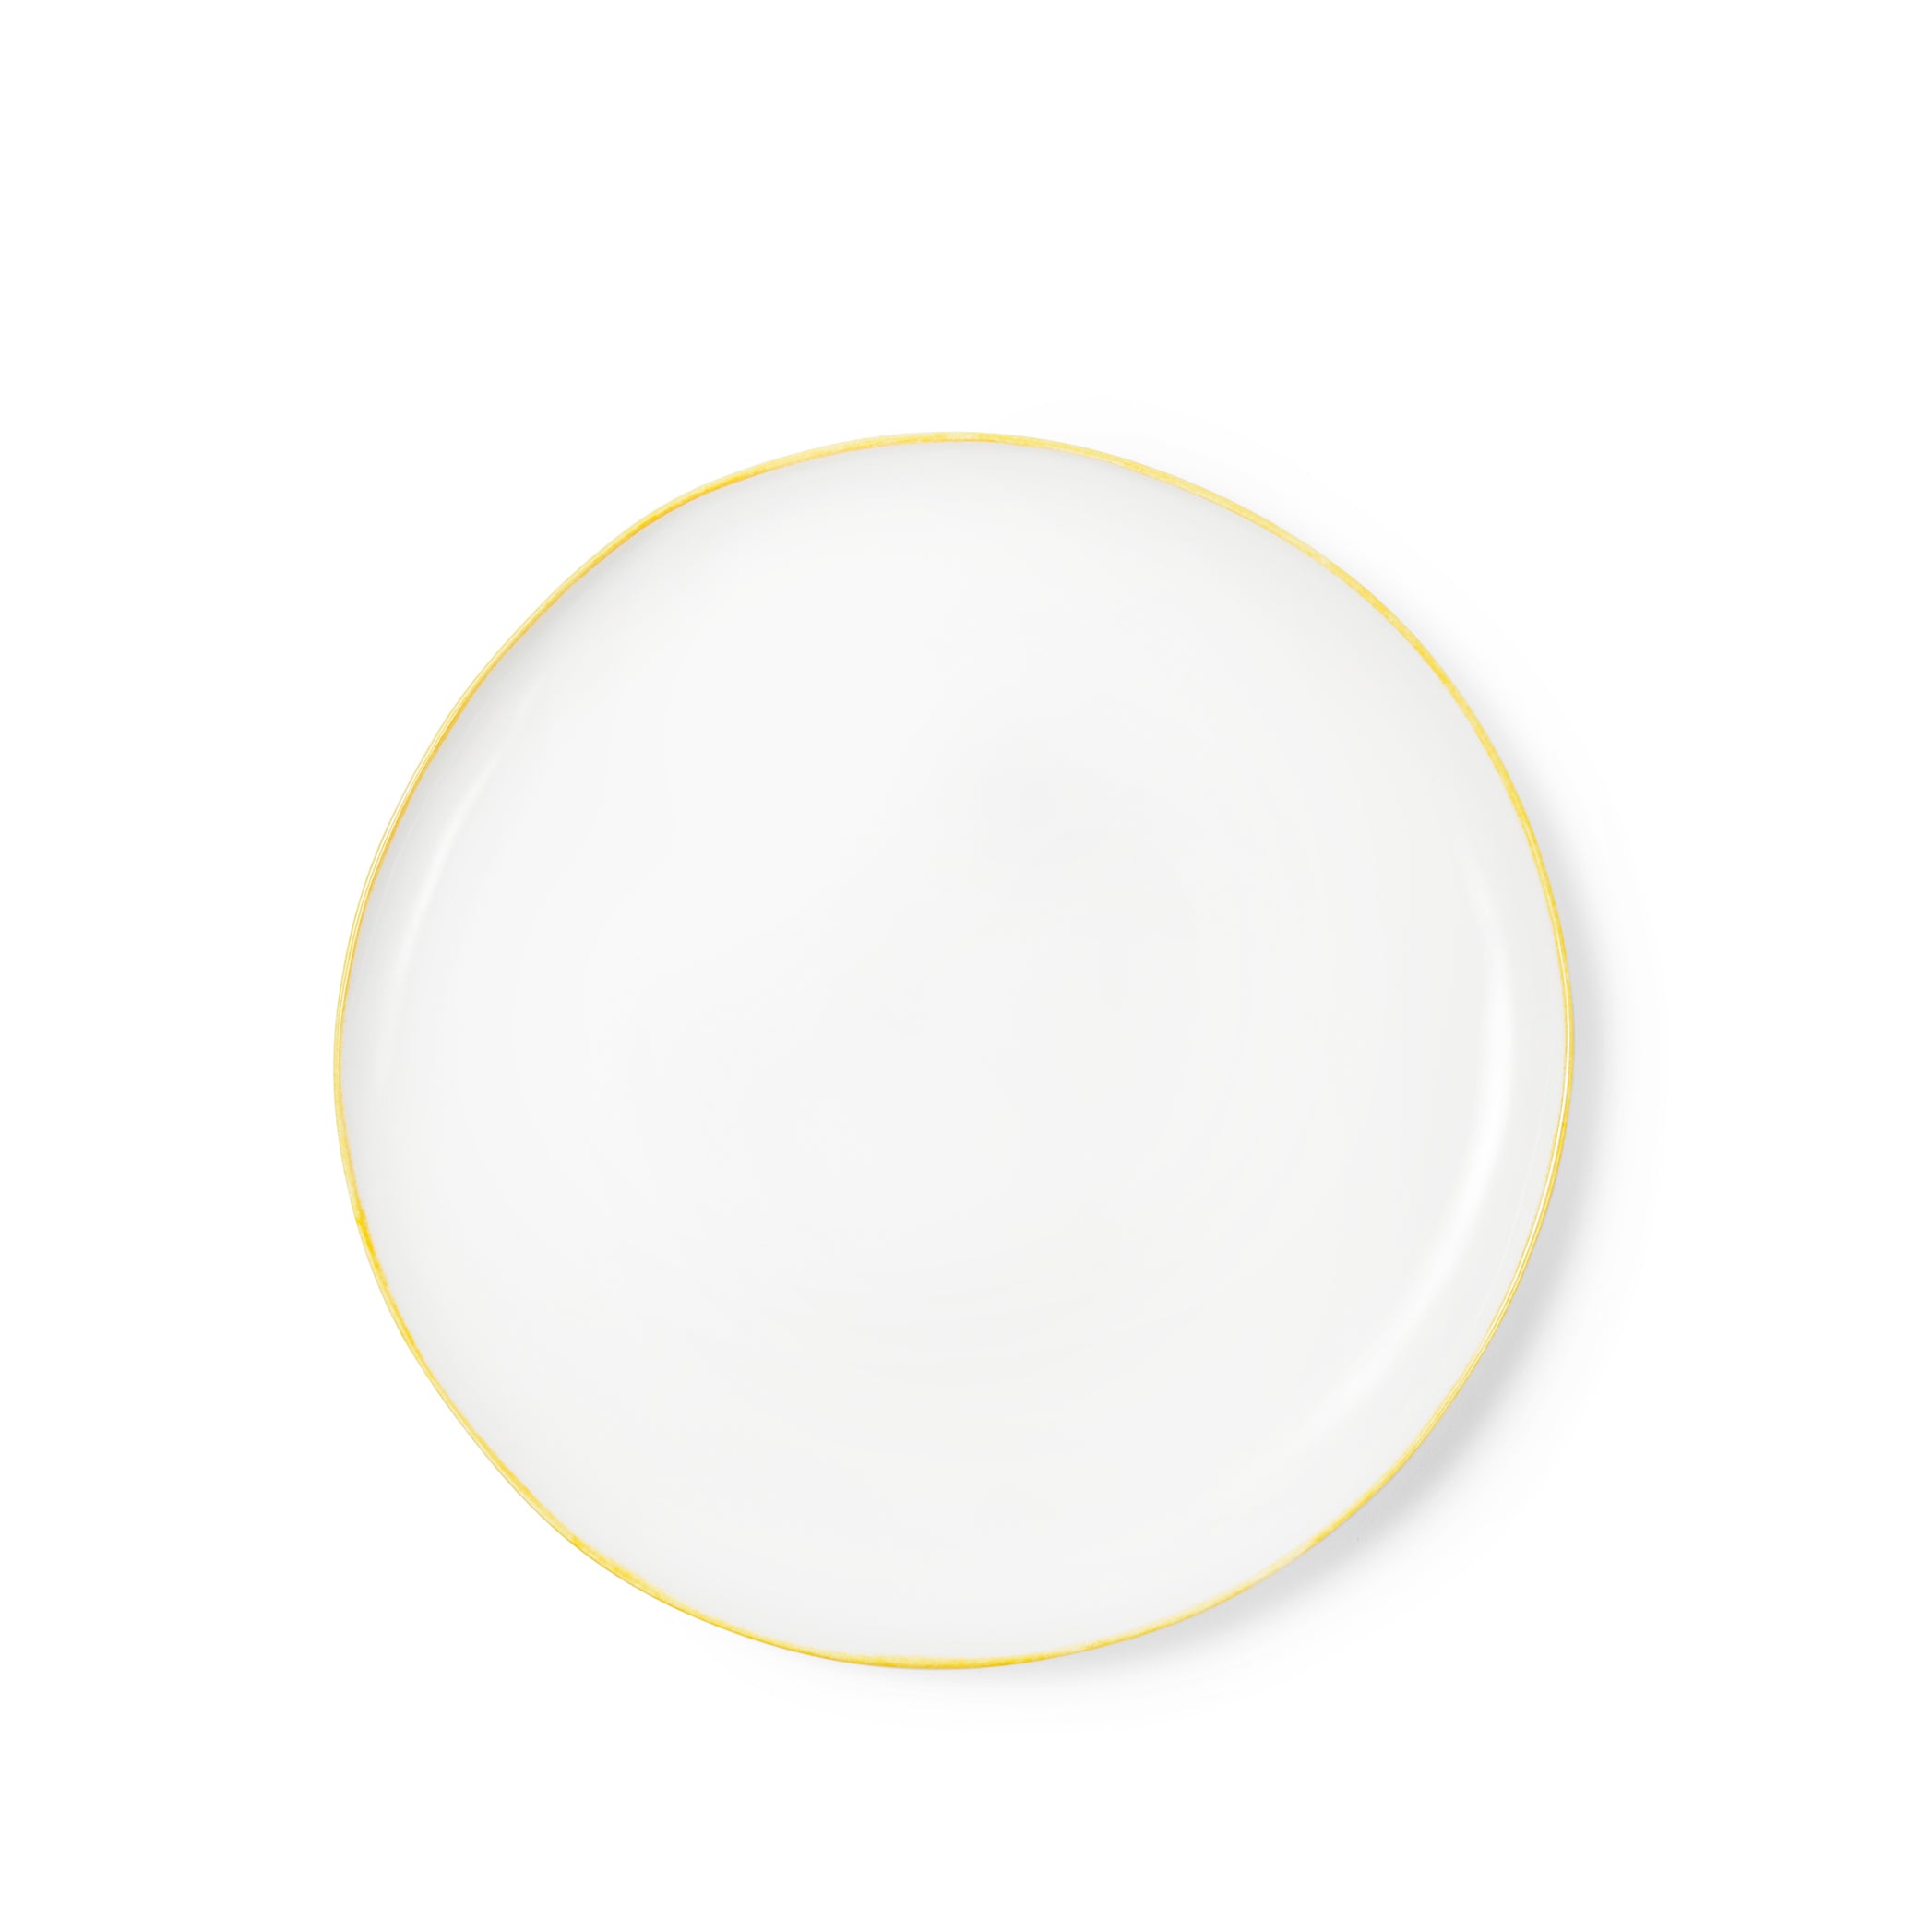 Made to Order - Summerill & Bishop Handmade 31cm Porcelain Dinner Plate with Yellow Rim